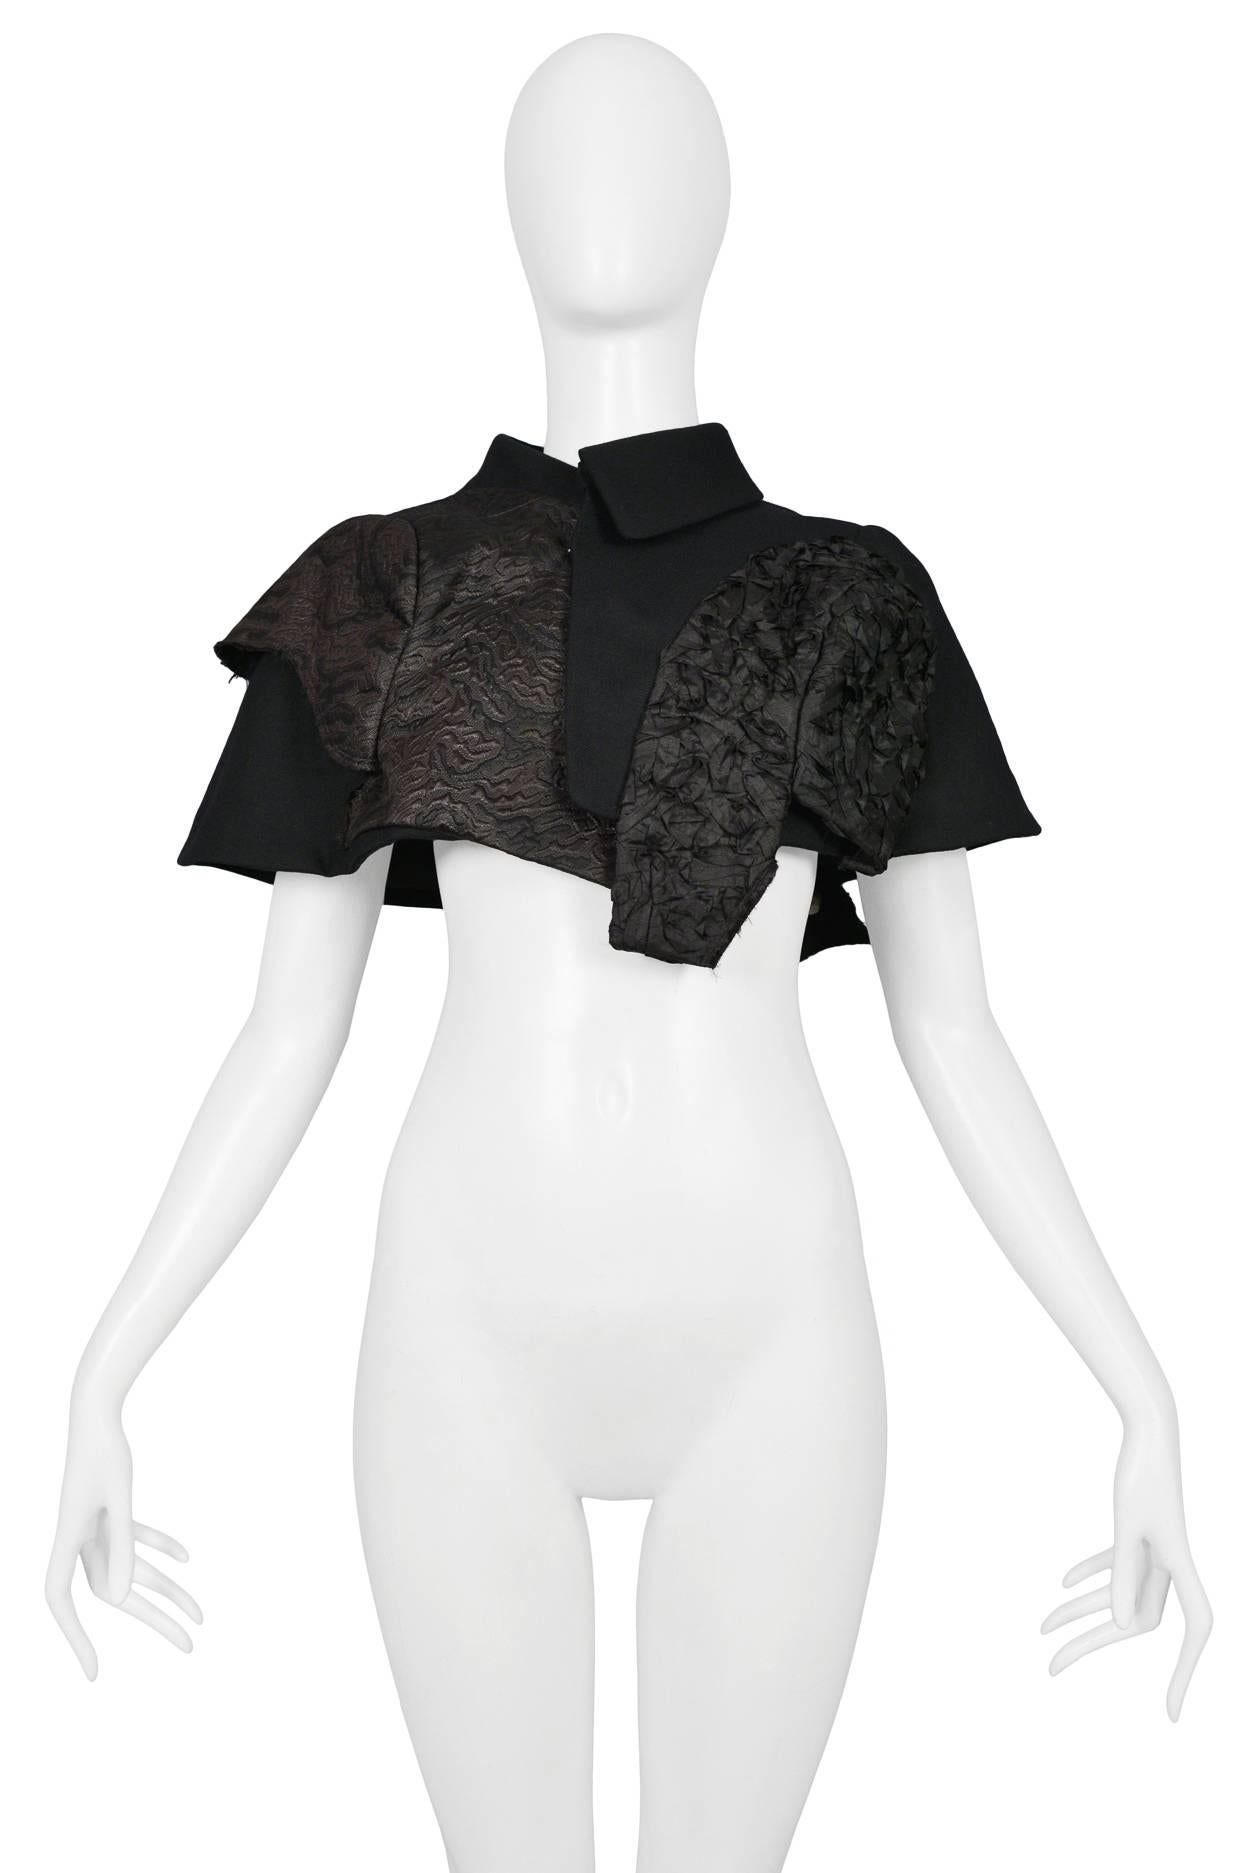 Comme des Garcons black capelet with mixed fabrics. Features sequin and velvet fabric insets. SS 2010.